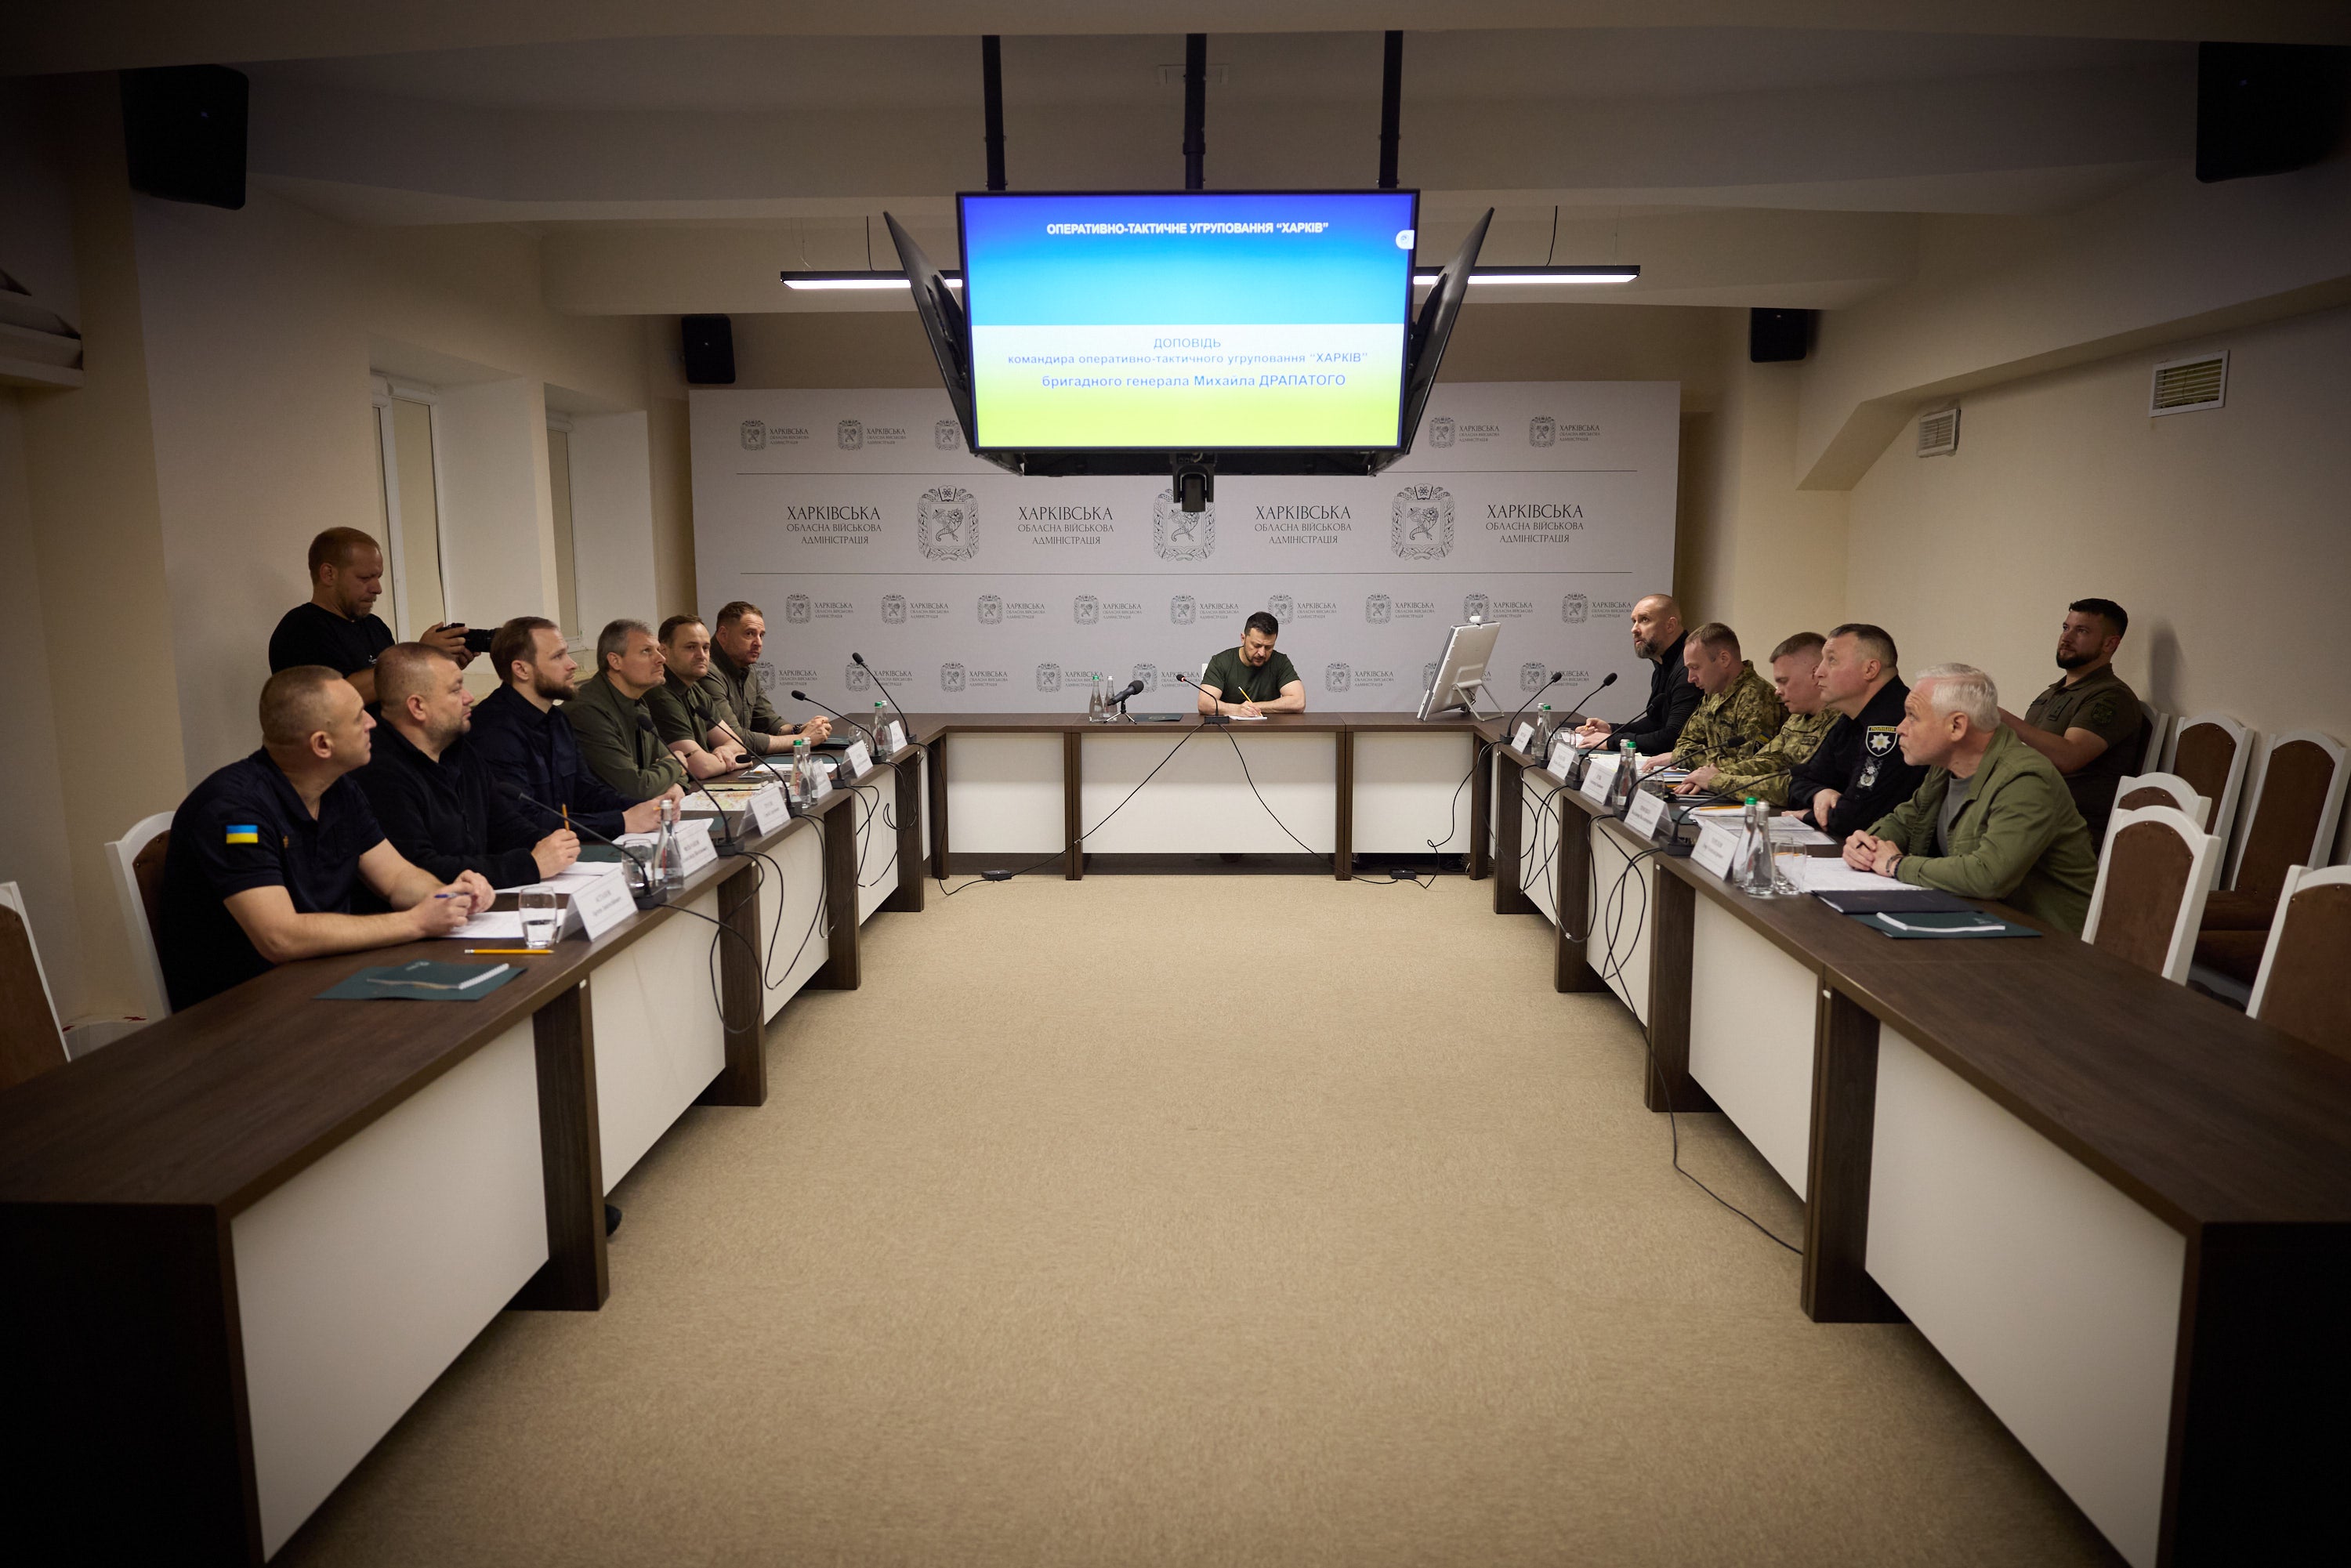 Ukrainian President Volodymyr Zelensky holds a meeting in Kharkiv on Friday to discuss, among other topics, the housing needs of evacuees